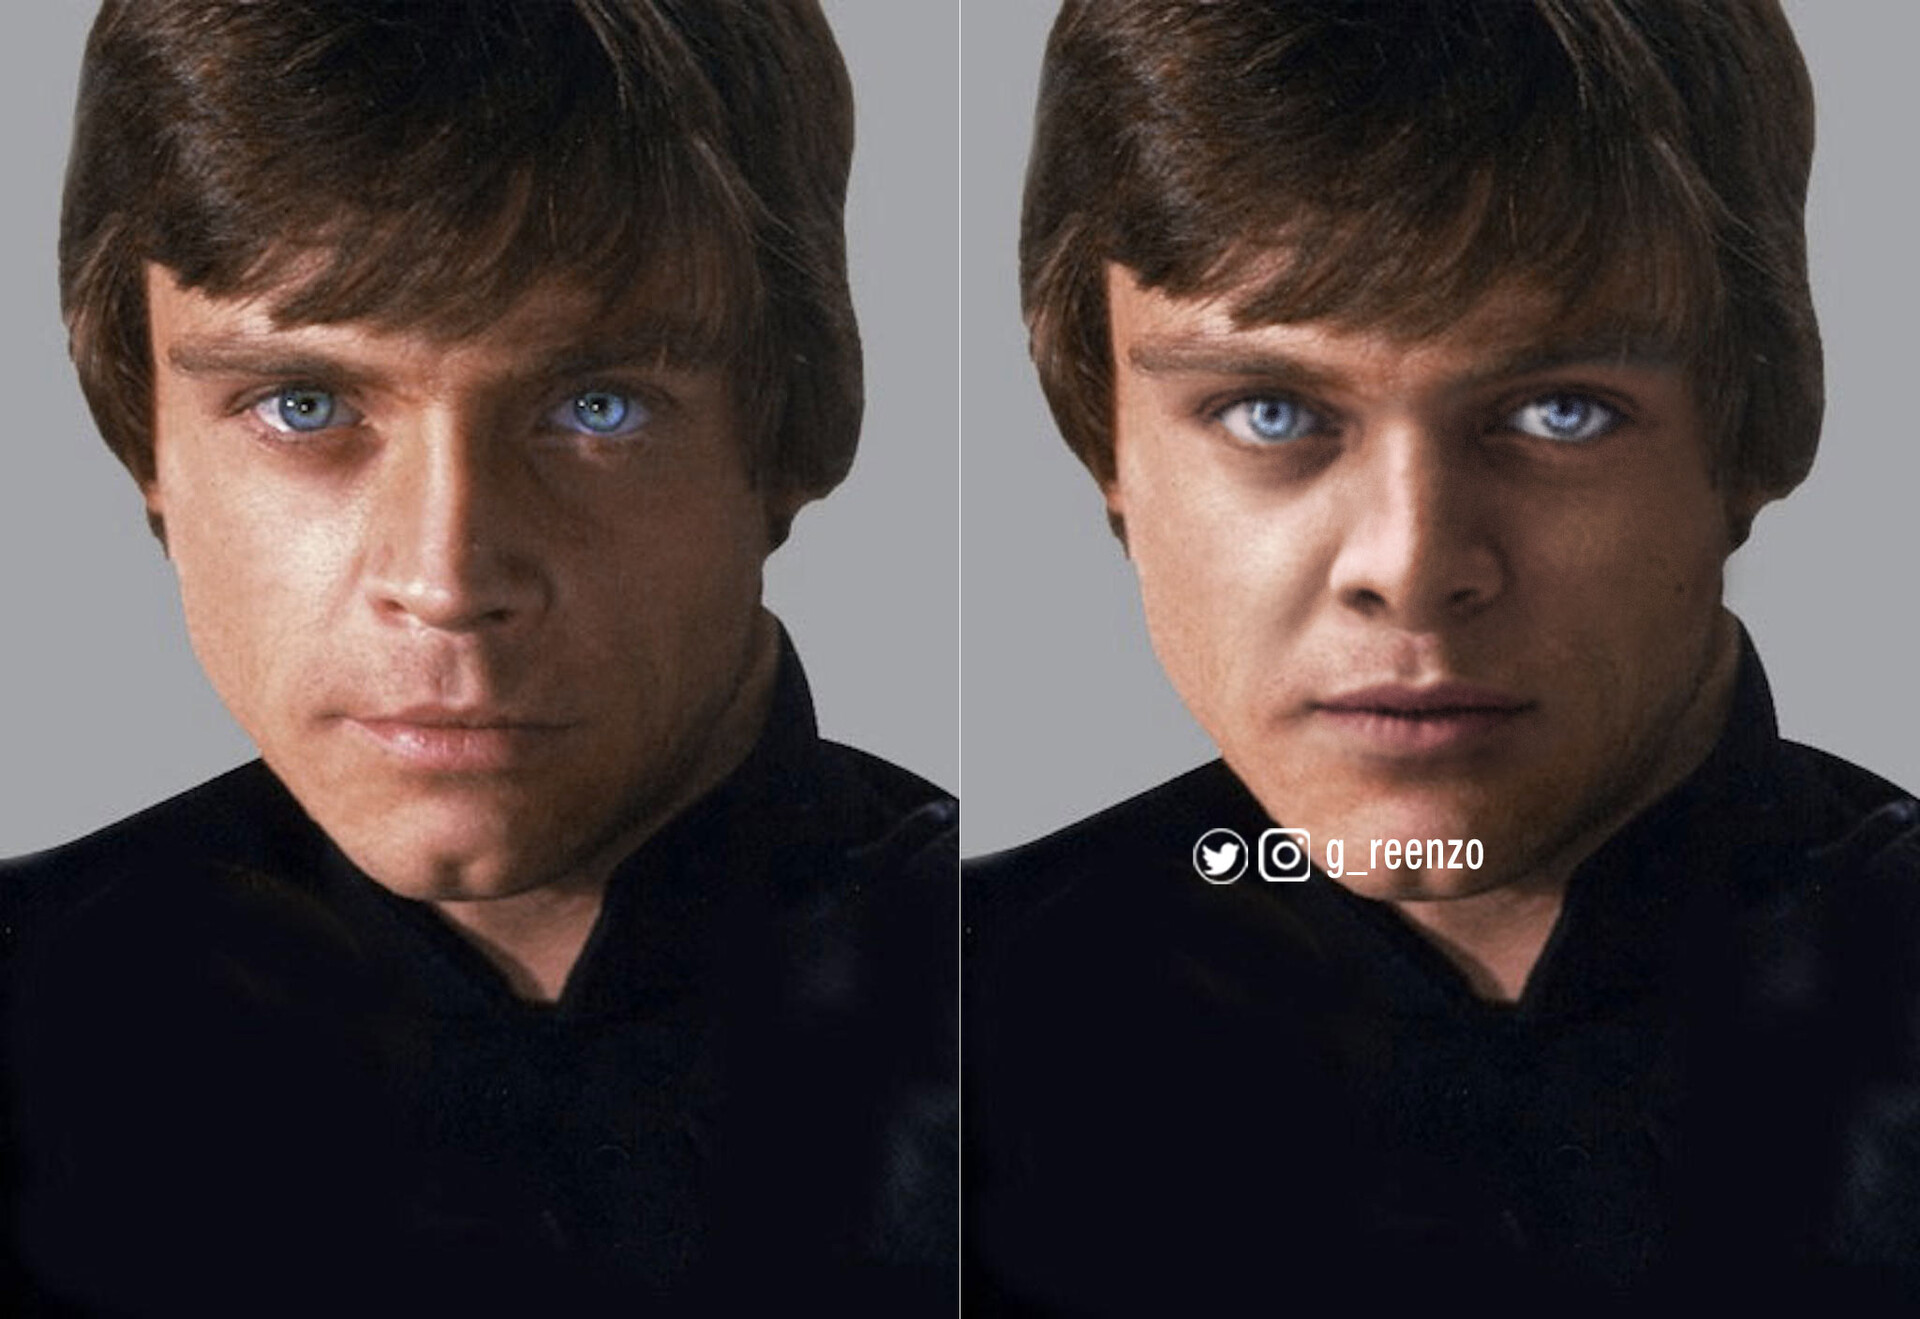 Fan Casting Alex Høgh Andersen as Sith in Face Claims Star Wars on myCast